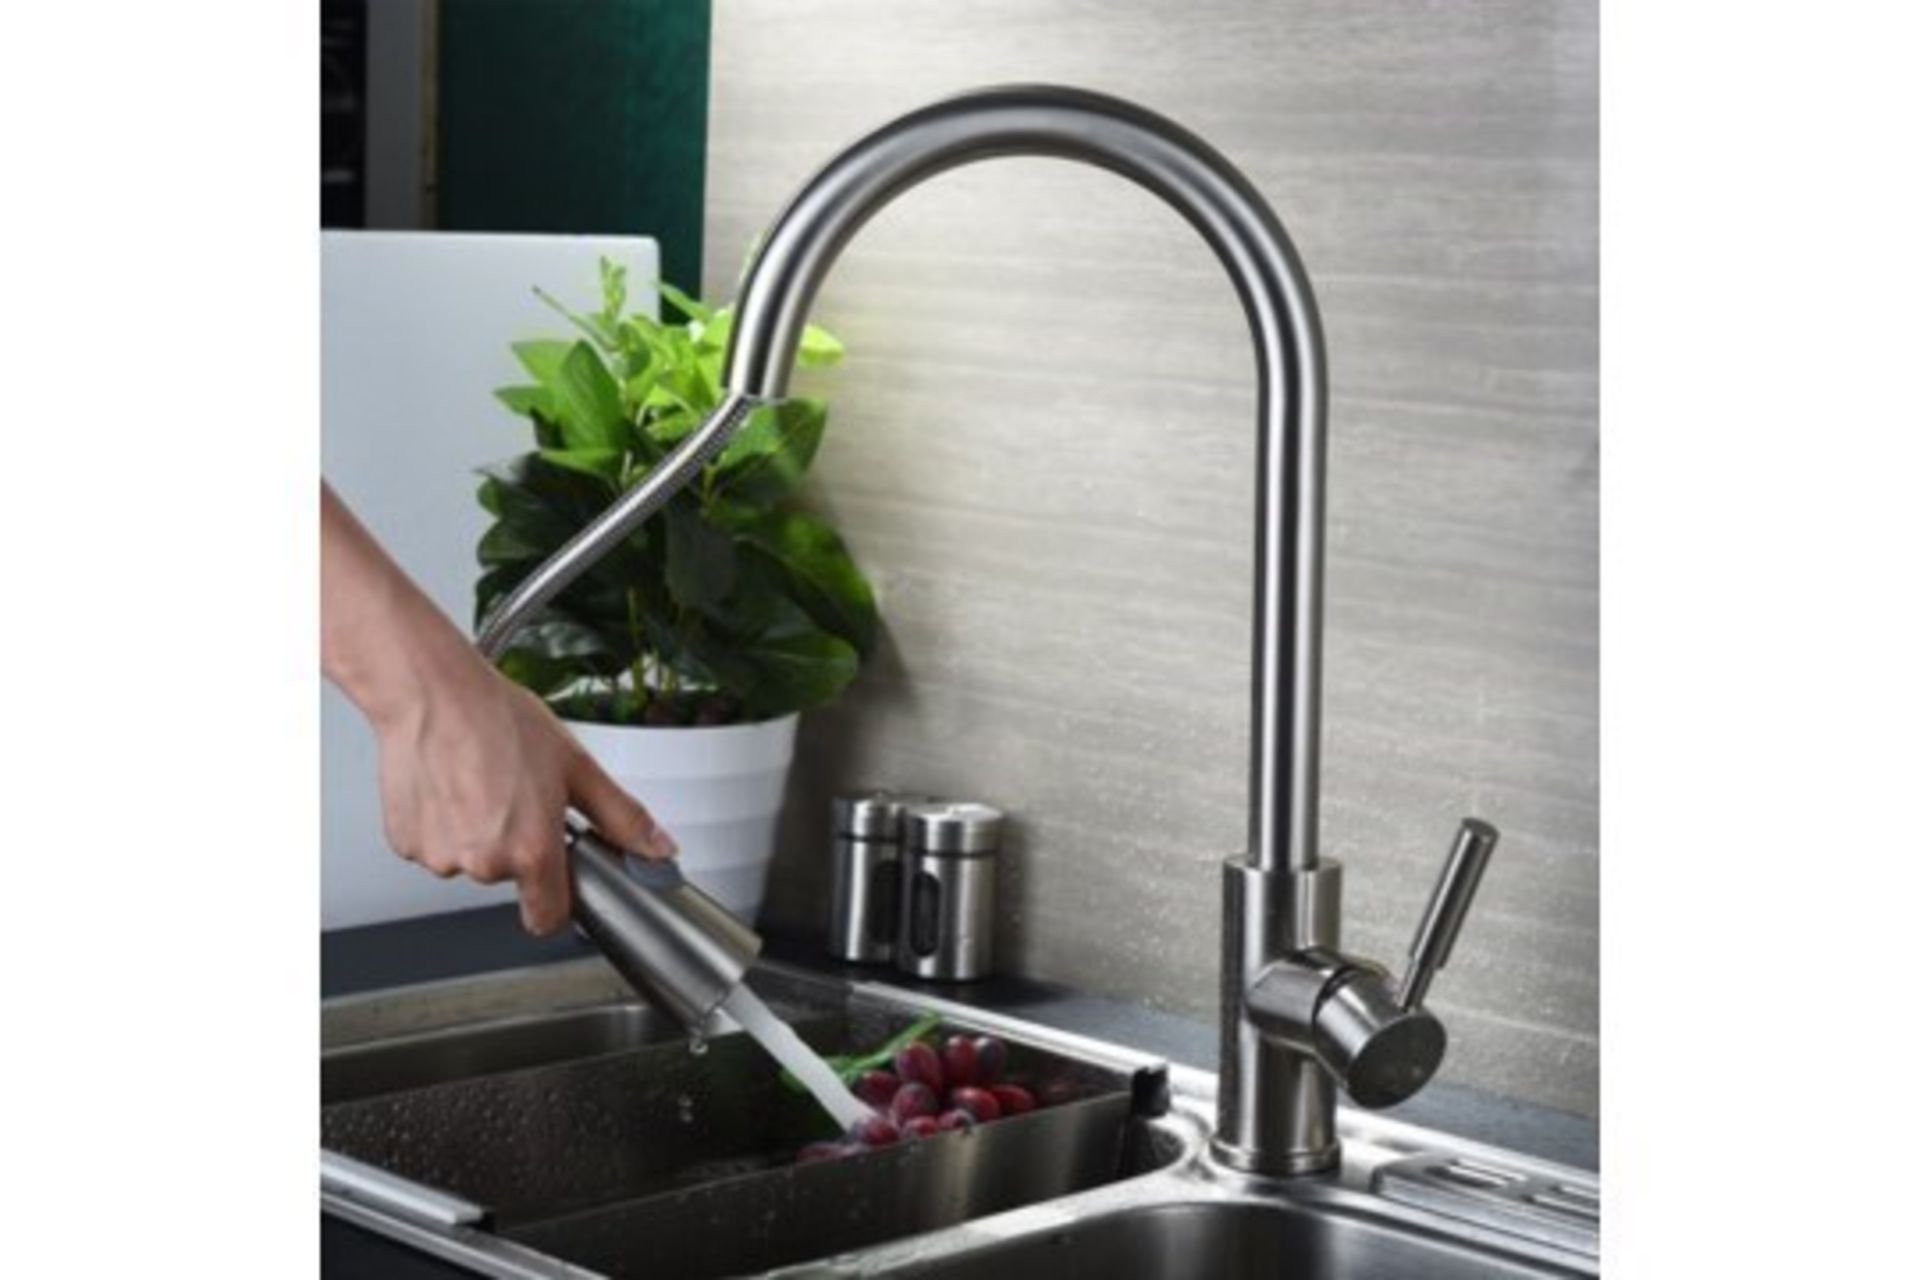 NEW & BOXED Della Modern Monobloc Chrome Brass Pull Out Spray Mixer Tap. RRP £299.99.This tap ... - Image 2 of 2